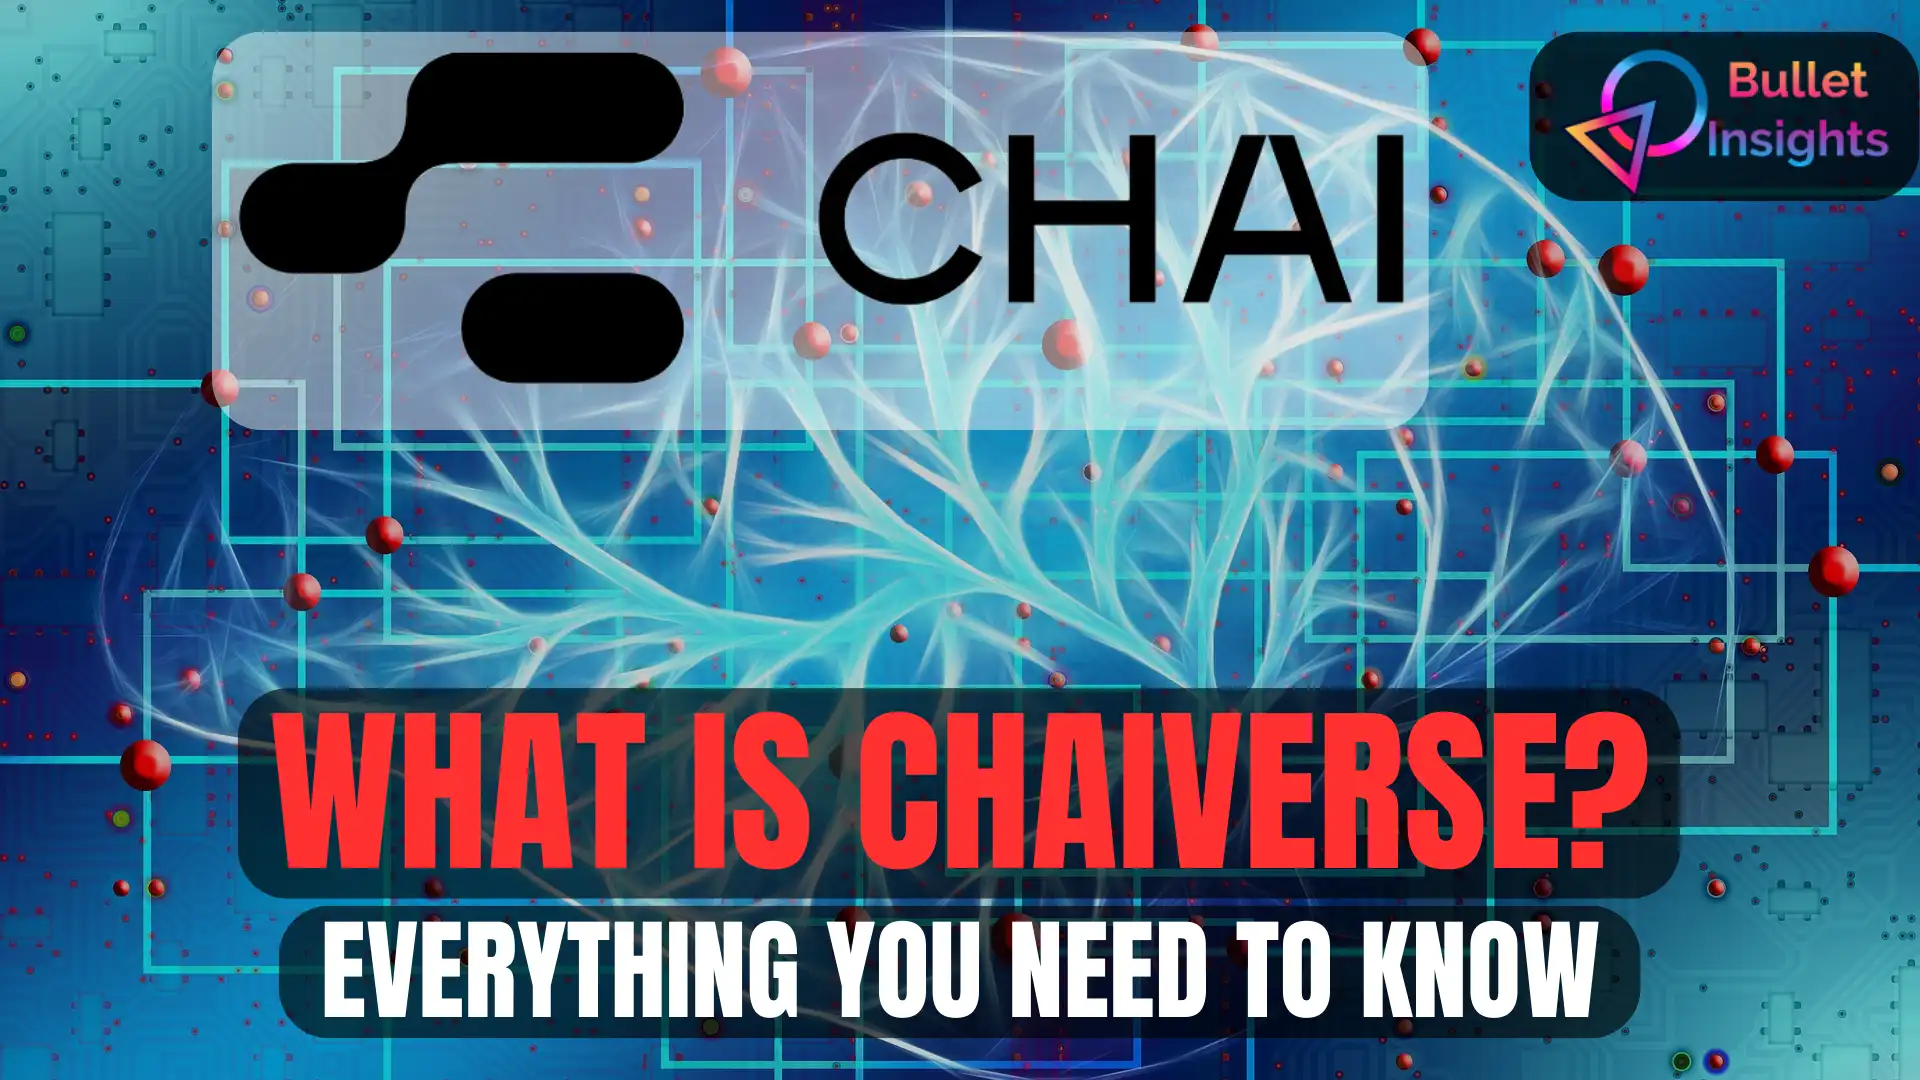 What is ChaiVerse? Everything you need to know